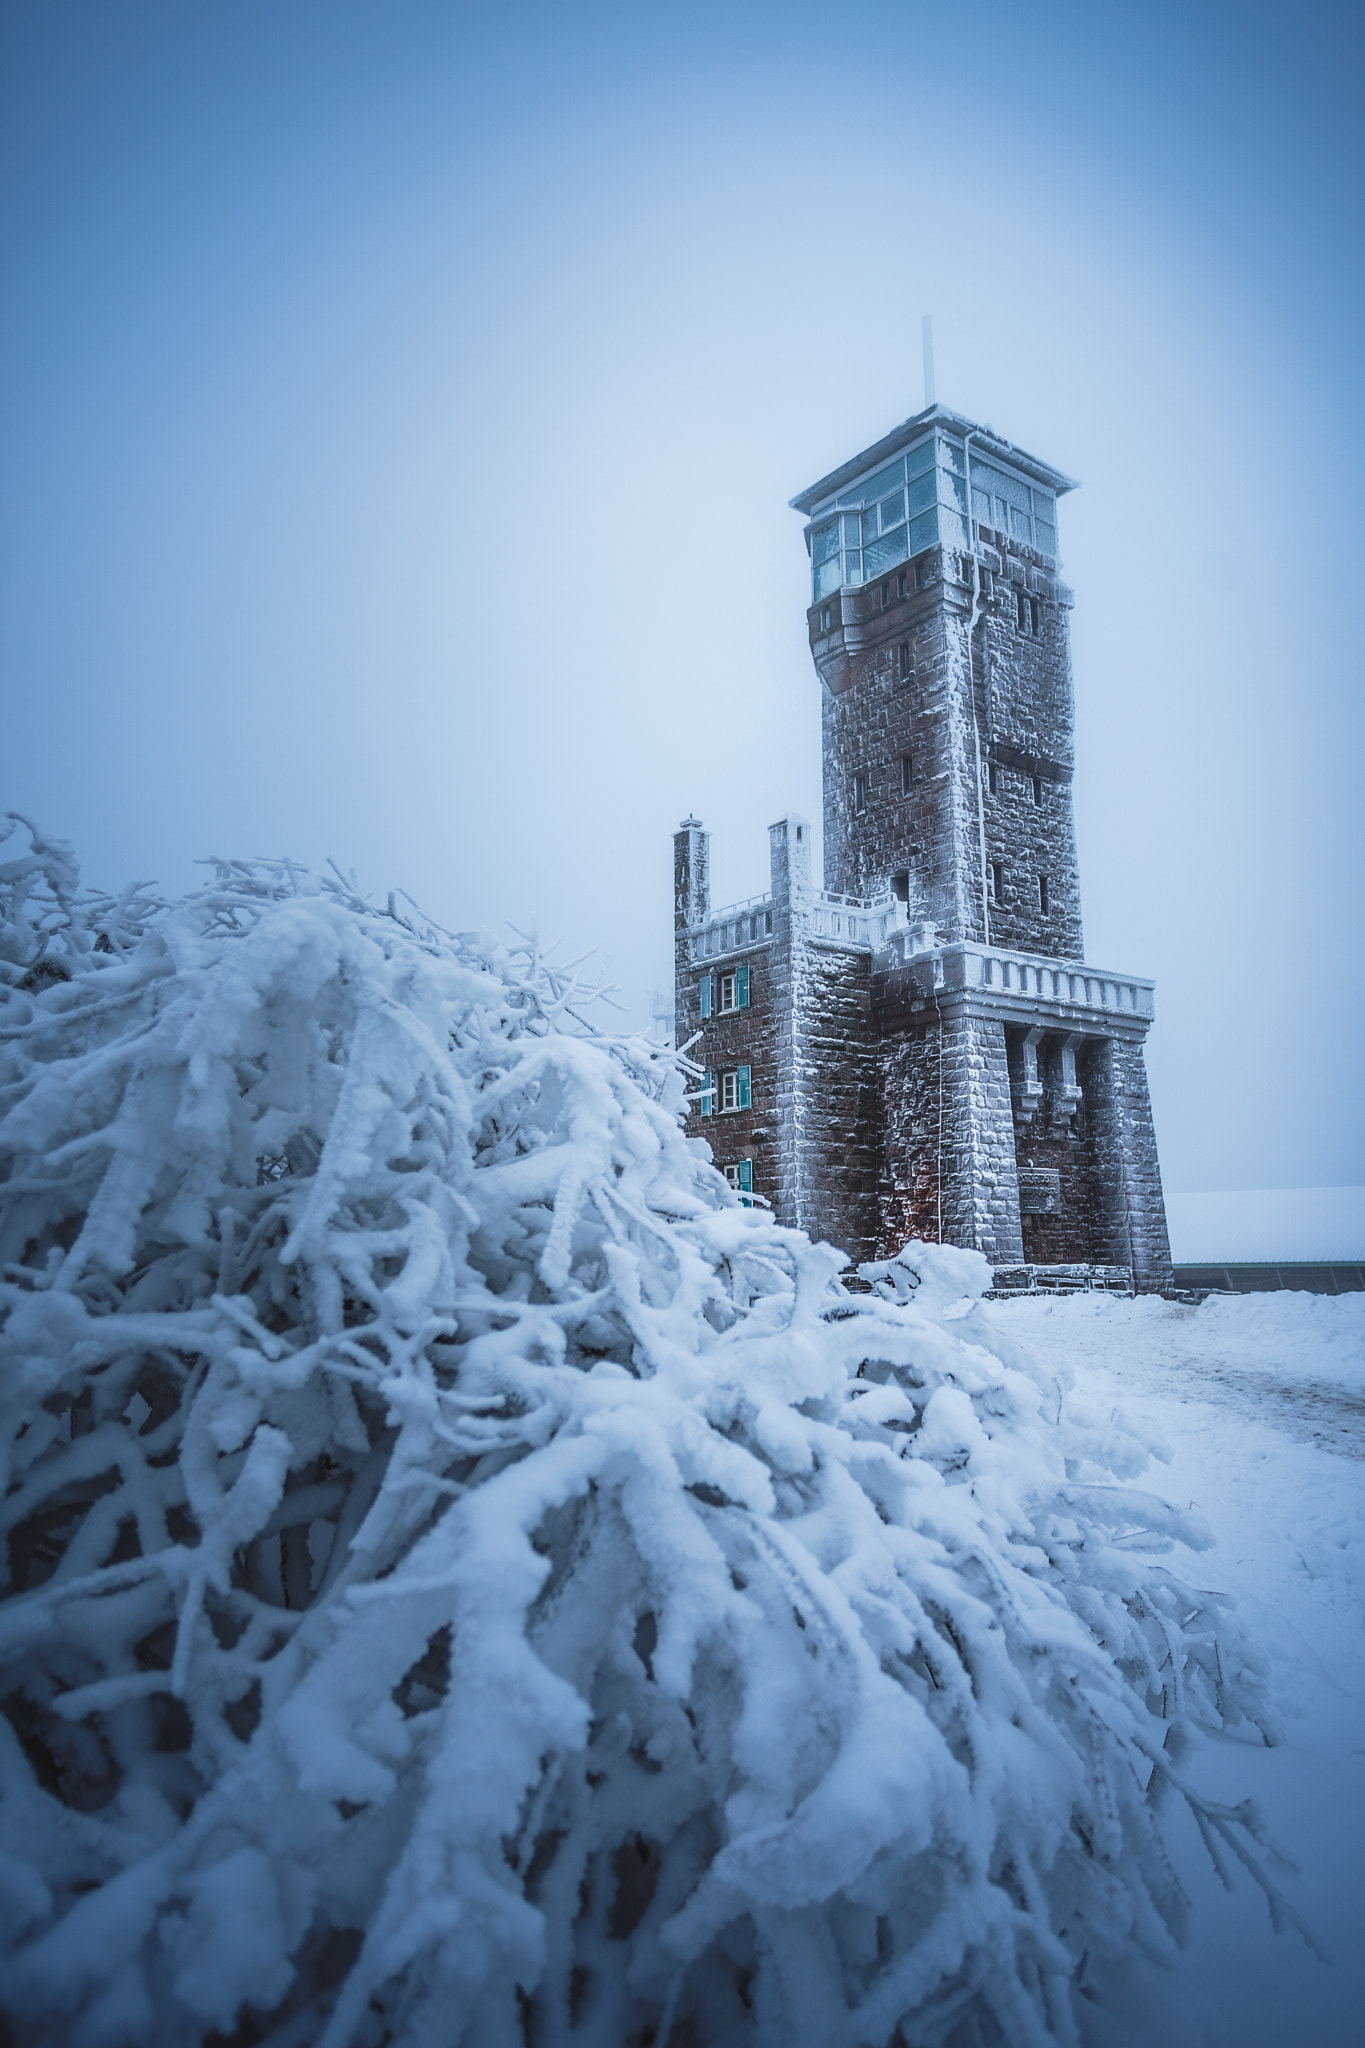 Sony a7 II + Tamron 18-270mm F3.5-6.3 Di II PZD sample photo. Iced up observation tower photography